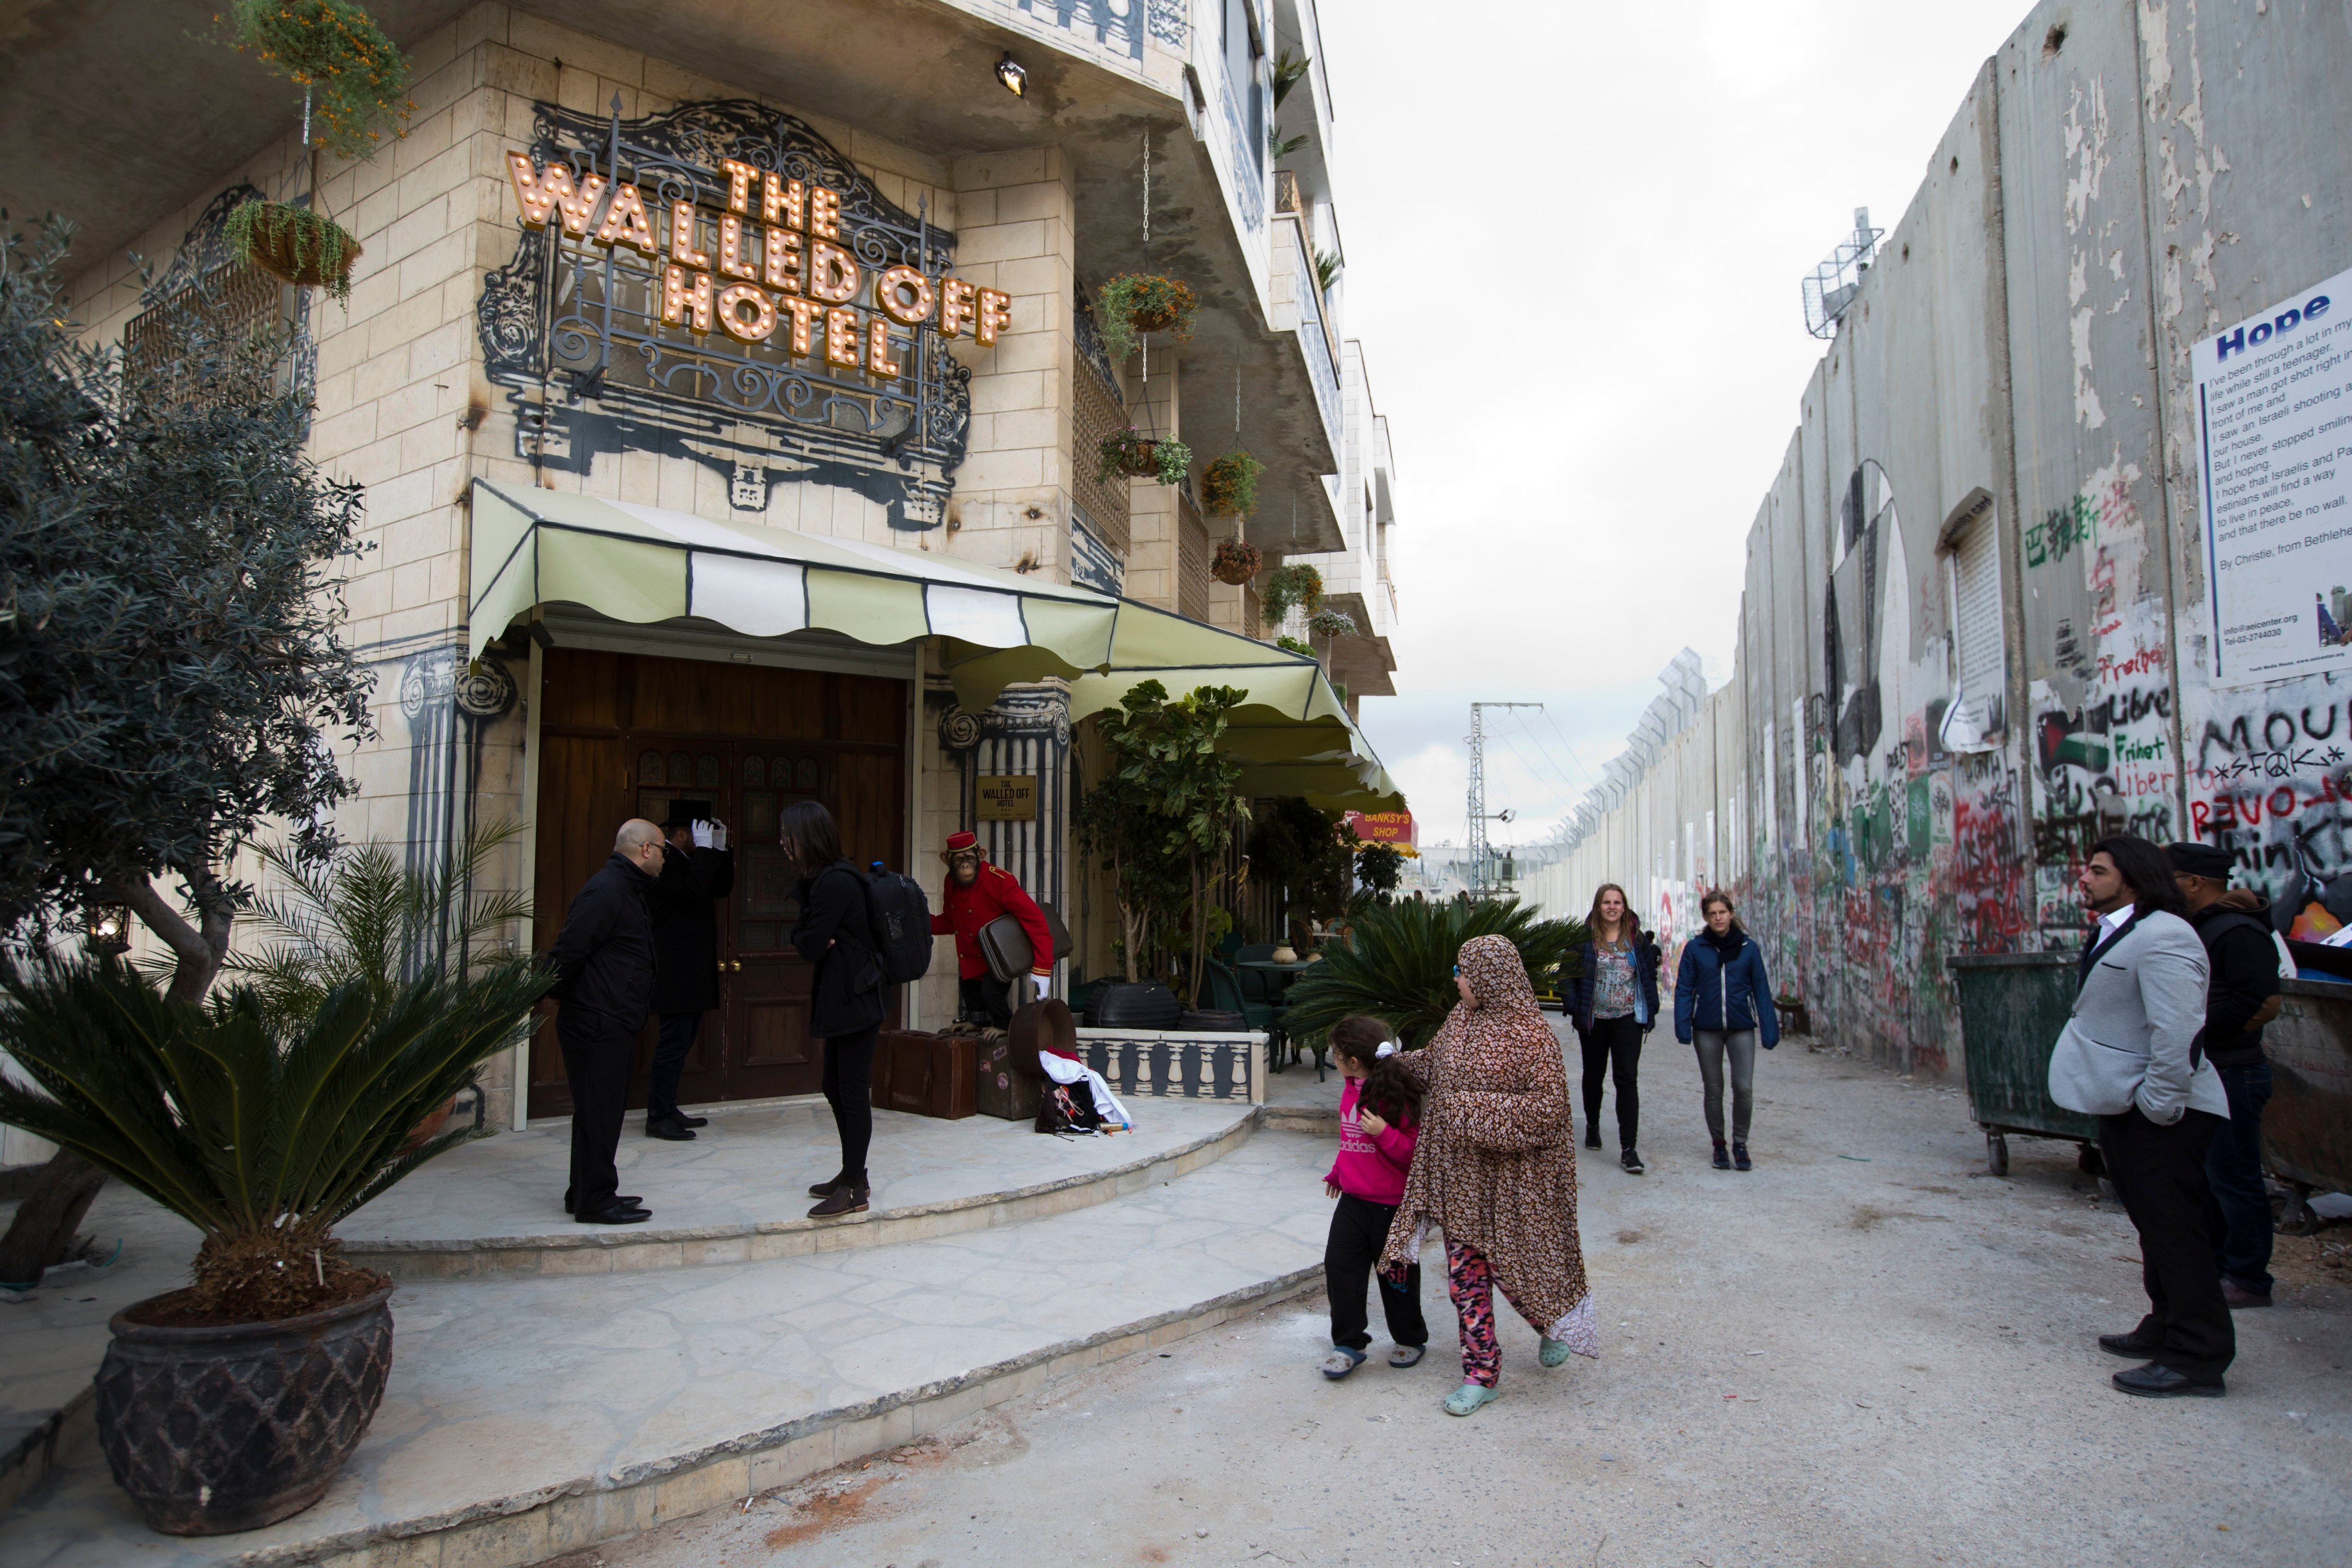 People pass by the "The Walled Off Hotel" and the Israeli security barrier in the West Bank city of Bethlehem, on March 3, 2017. (Dusan Vranic—AP)